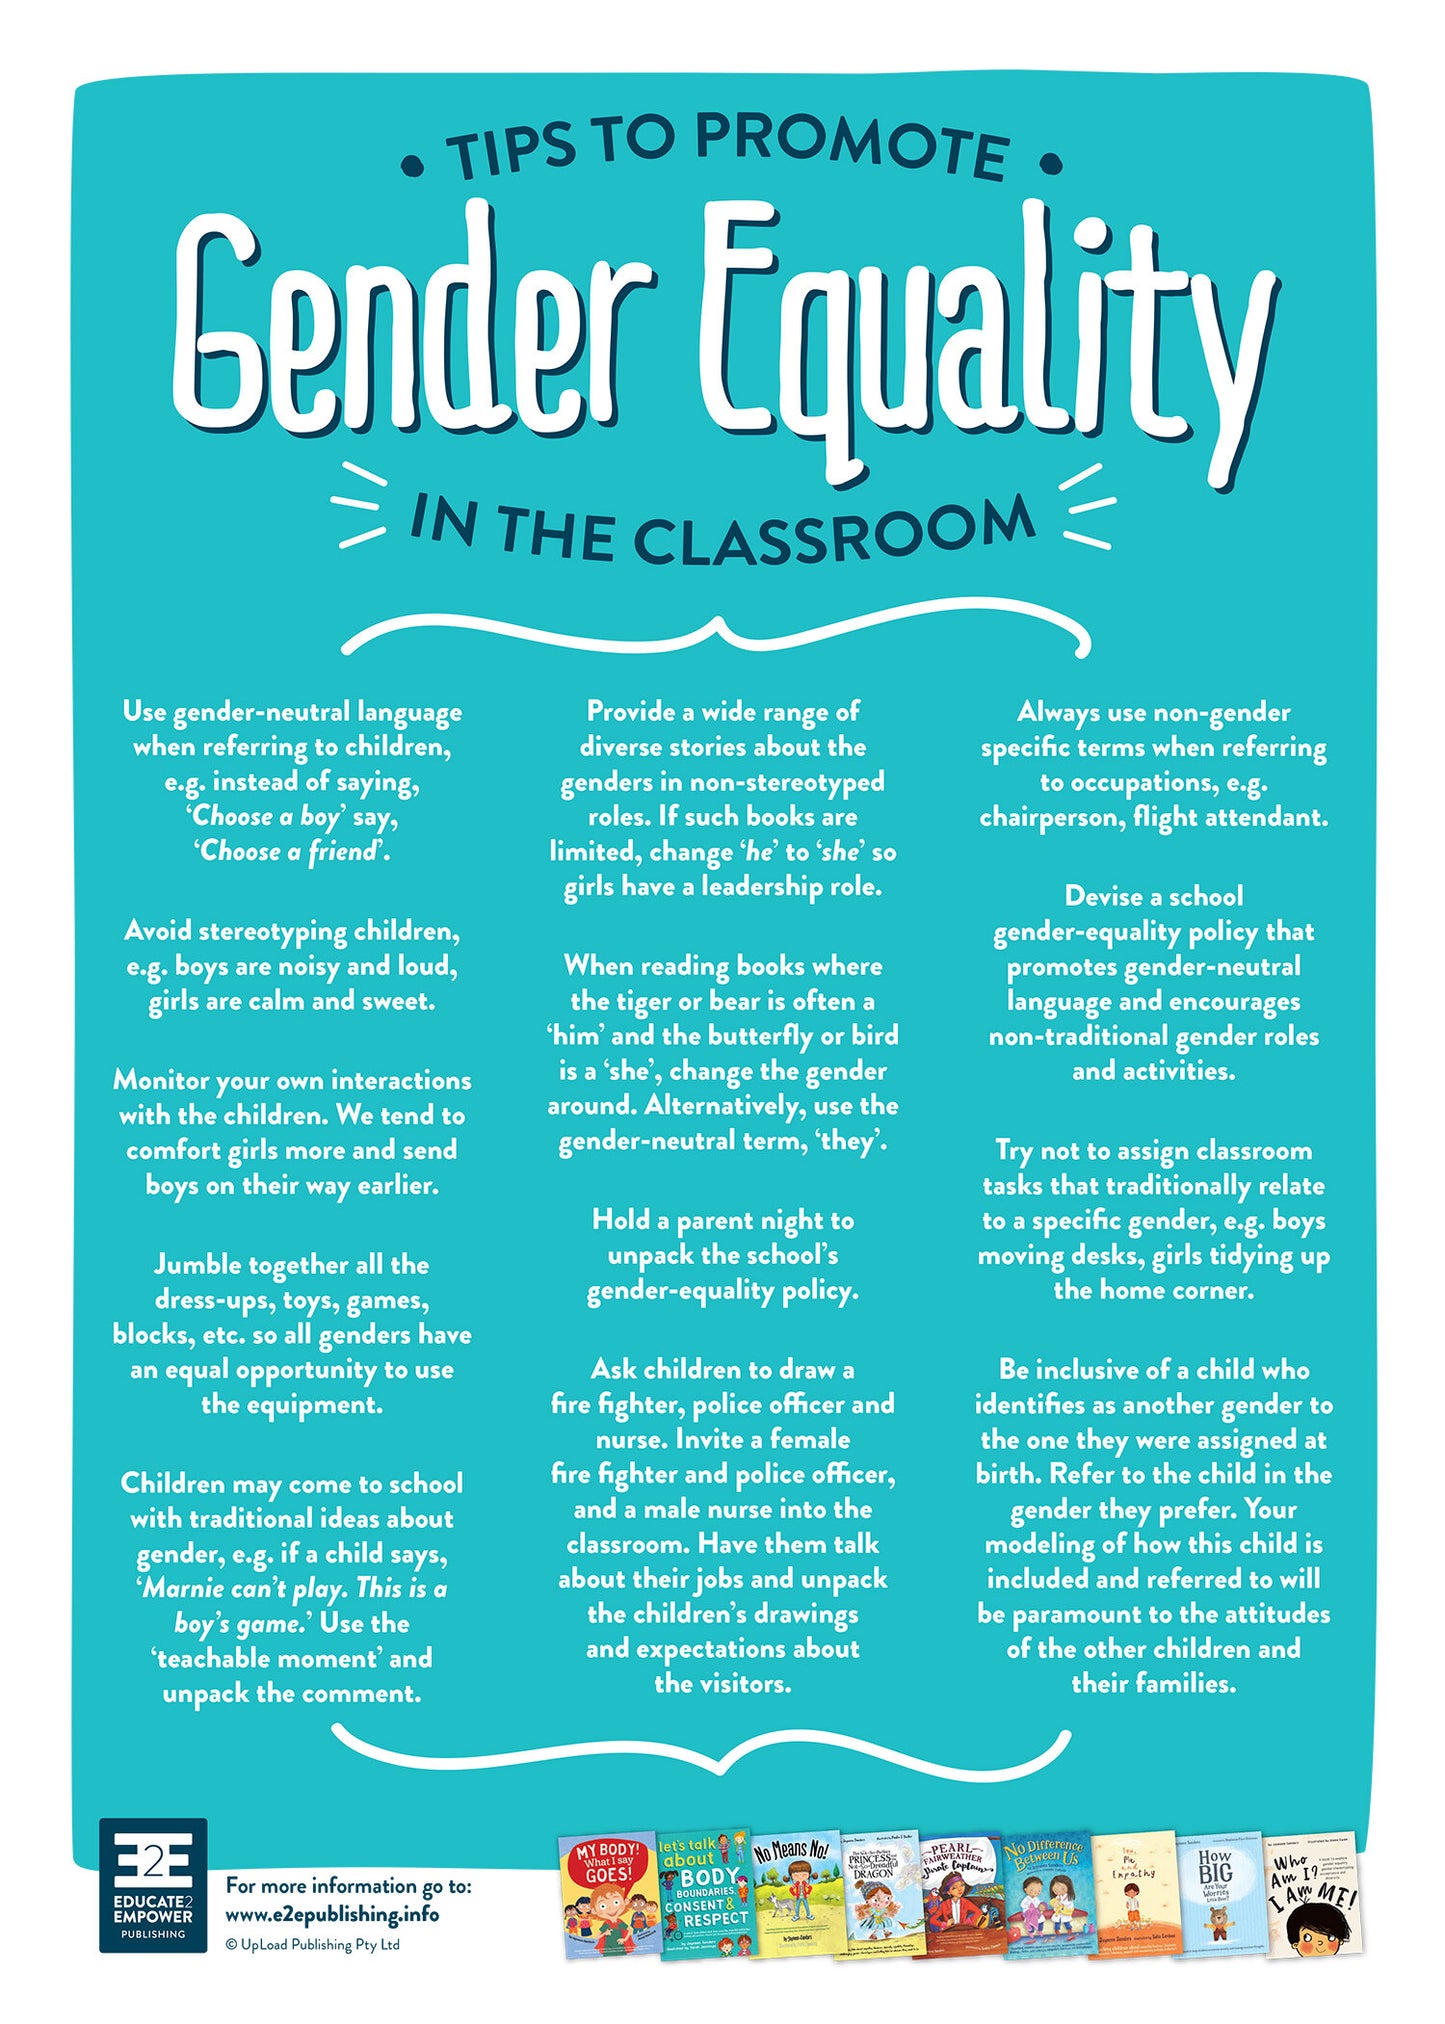 Gender Equality in the Classroom - FREE POSTER